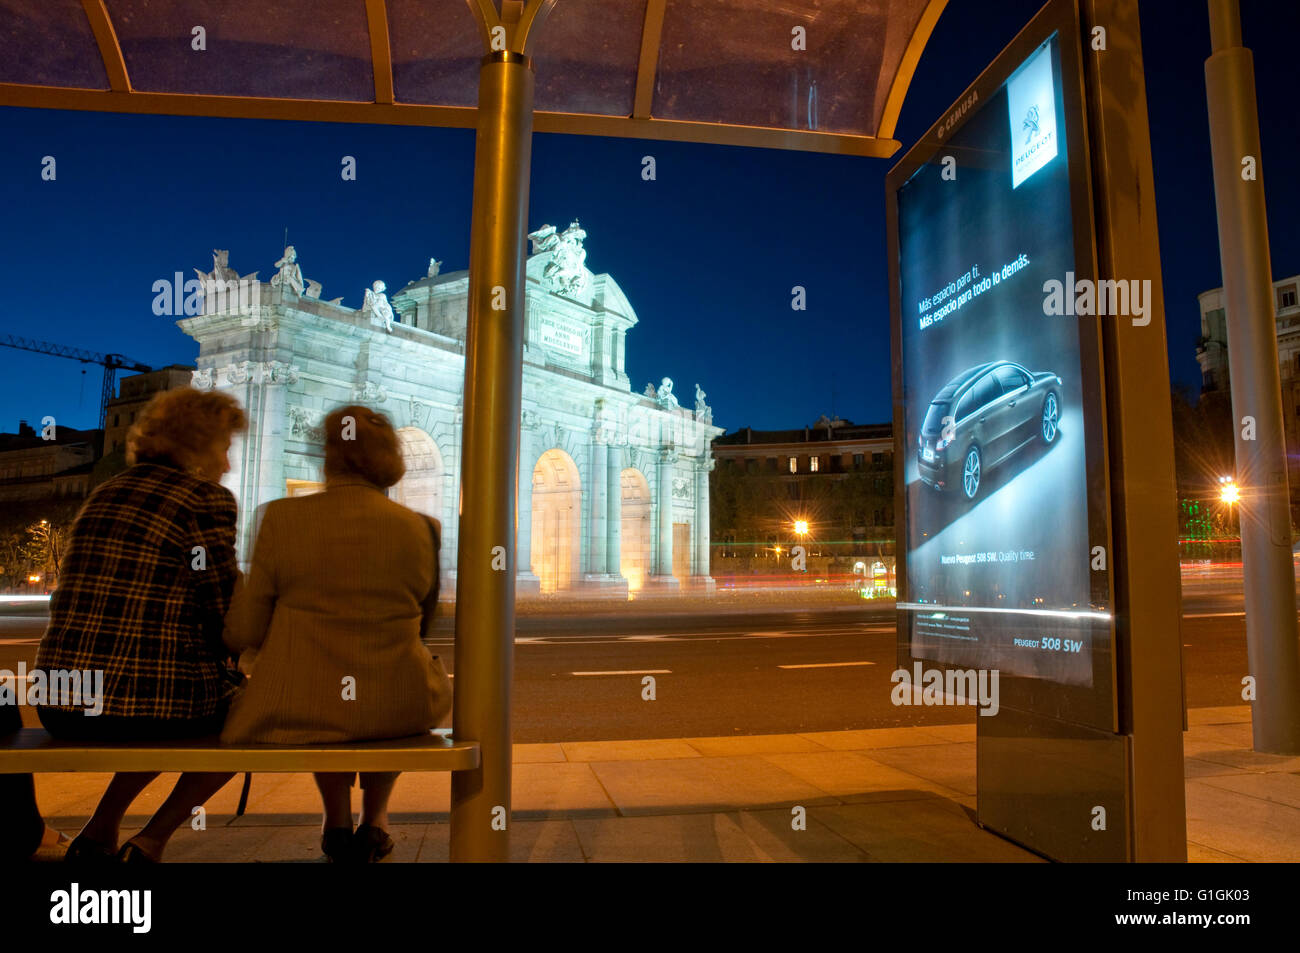 Bus stop in Independencia Square, night view. Madrid, Spain. Stock Photo